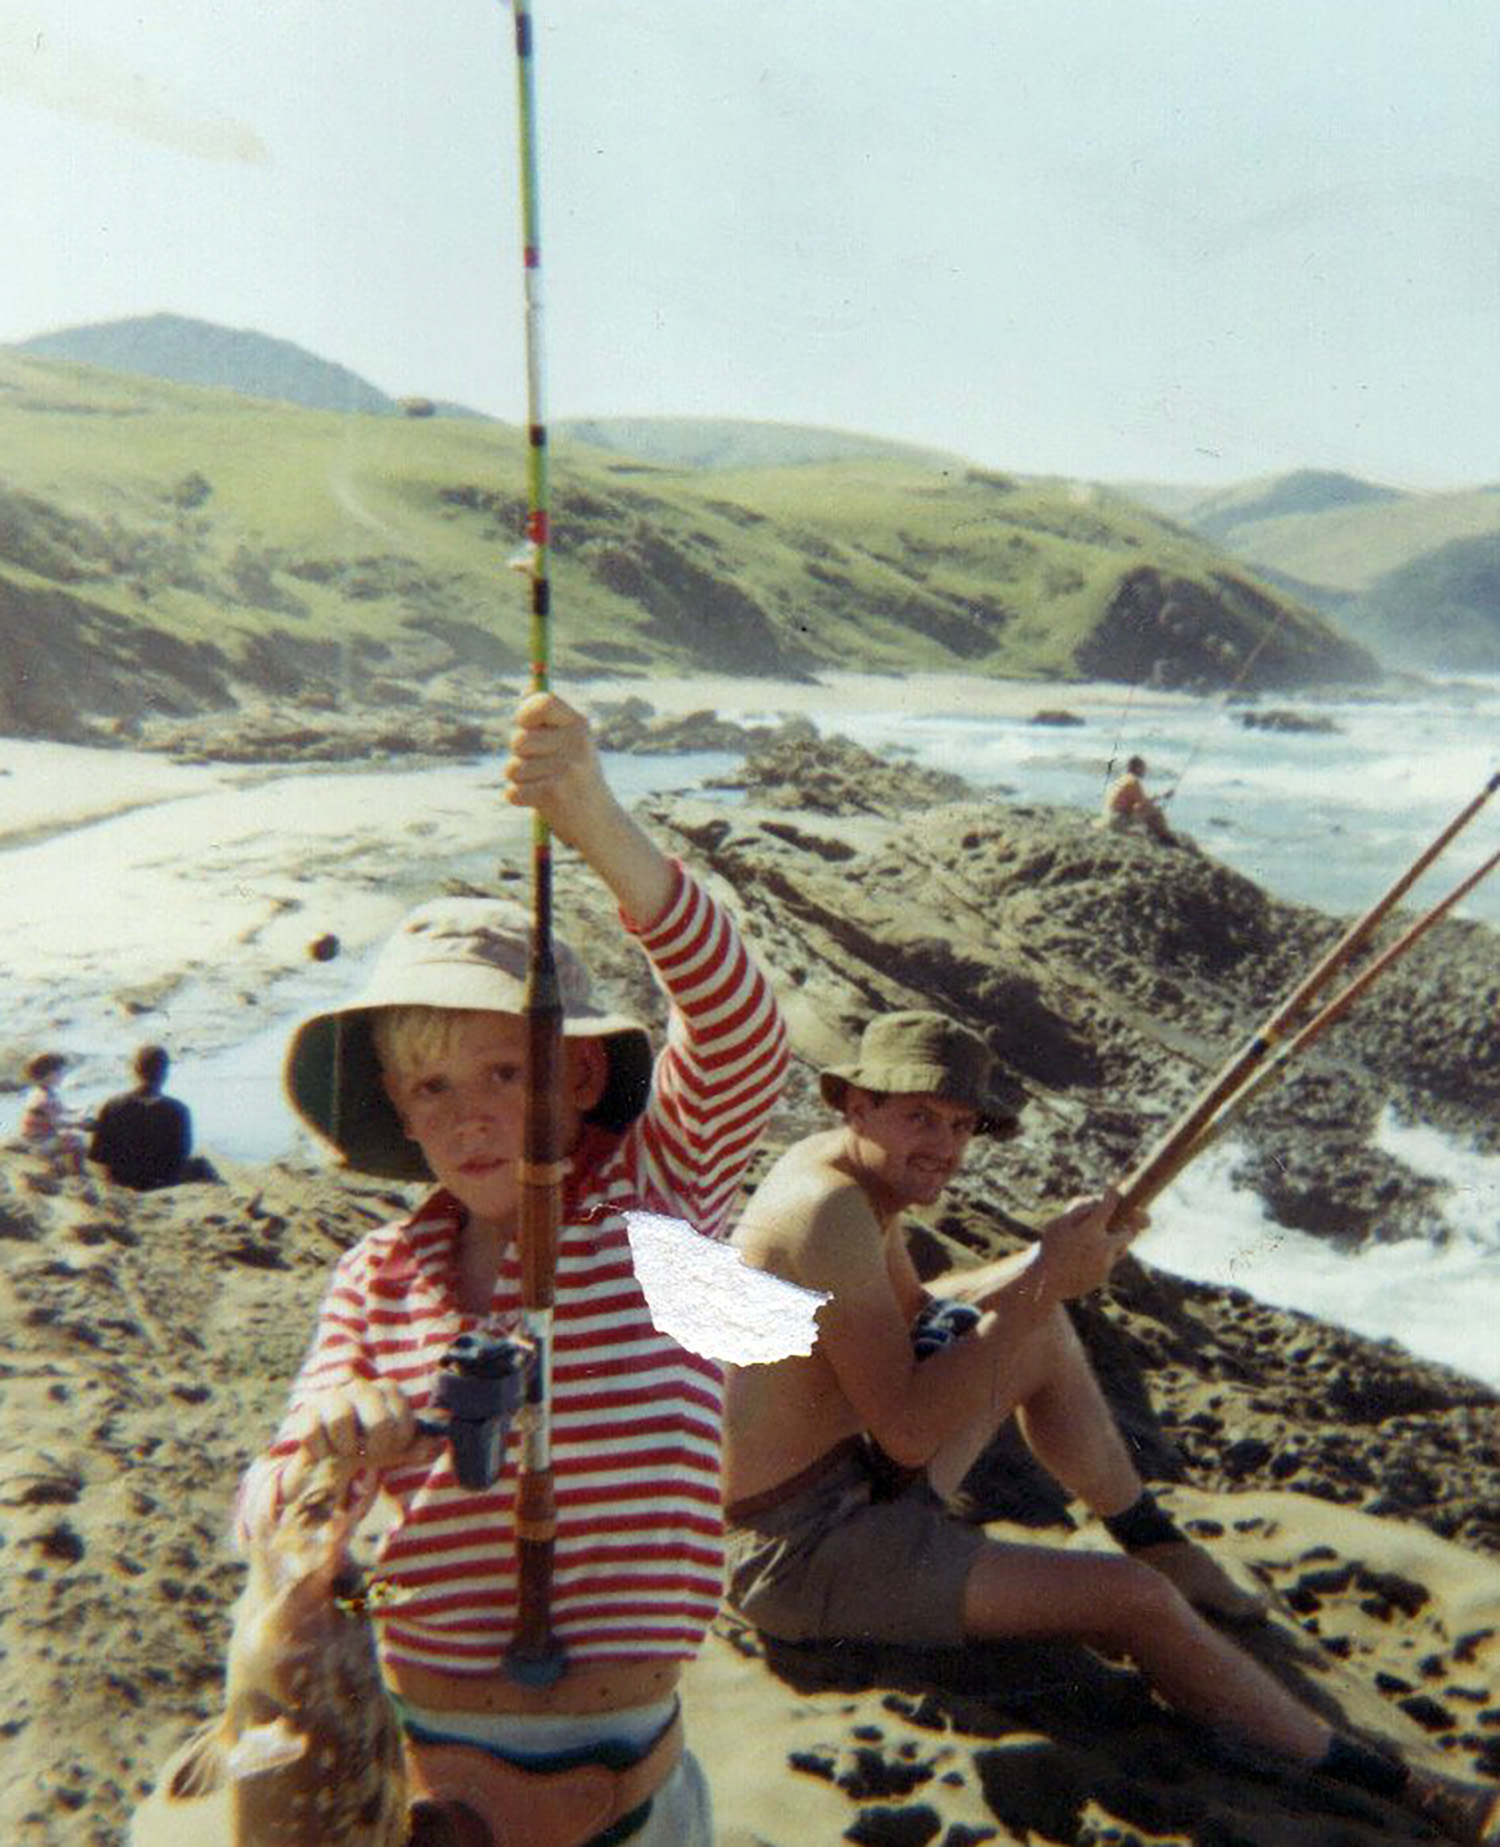 Hamilton Wende fishing on the beach with his father